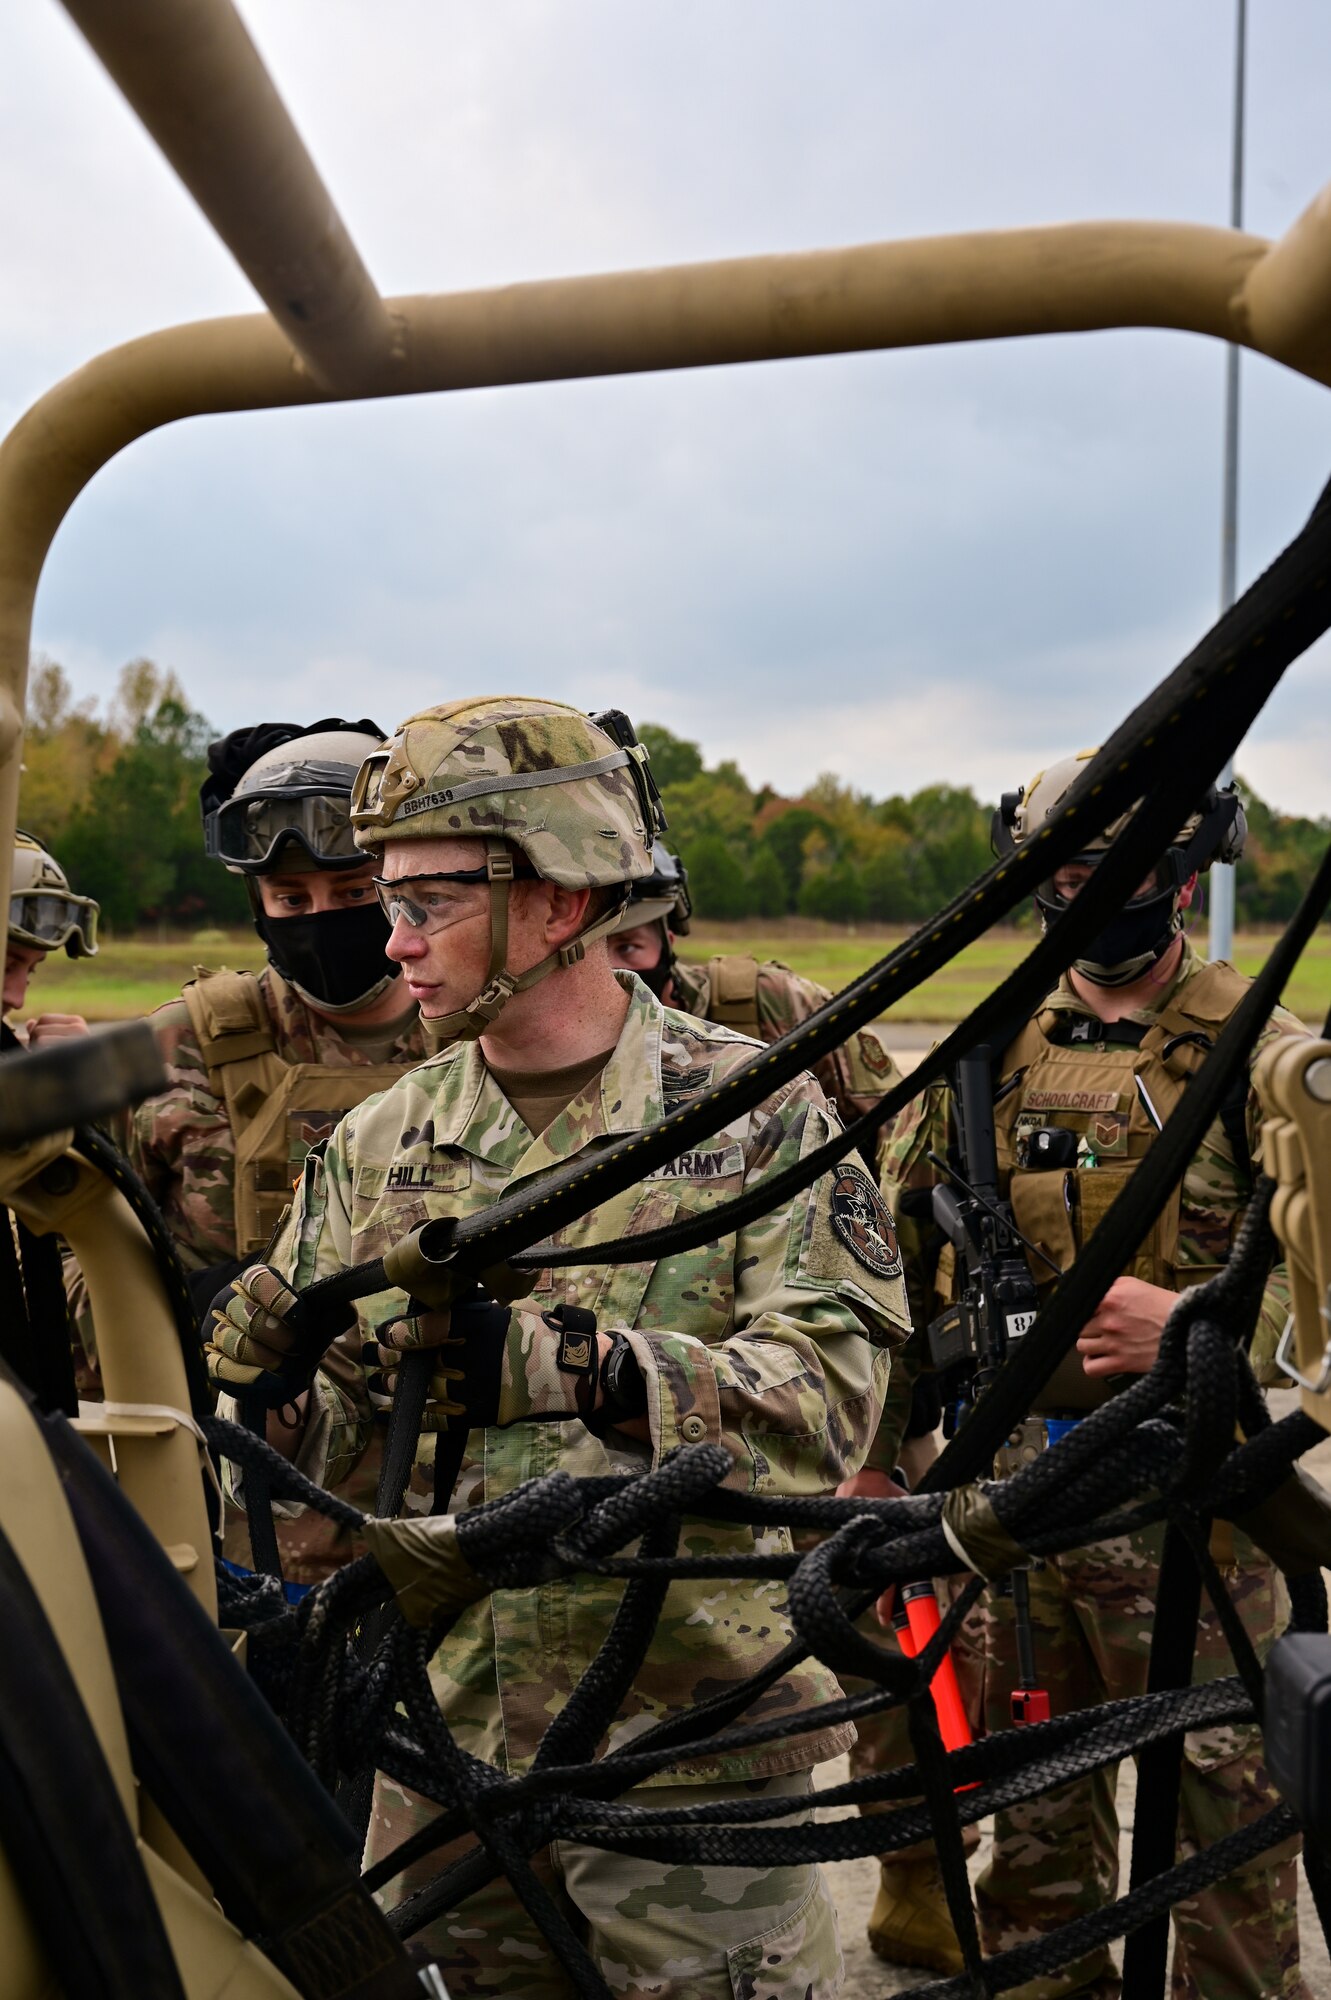 A Soldier inspects the rigging of a support device that attaches an off-road vehicle to a helicopter.